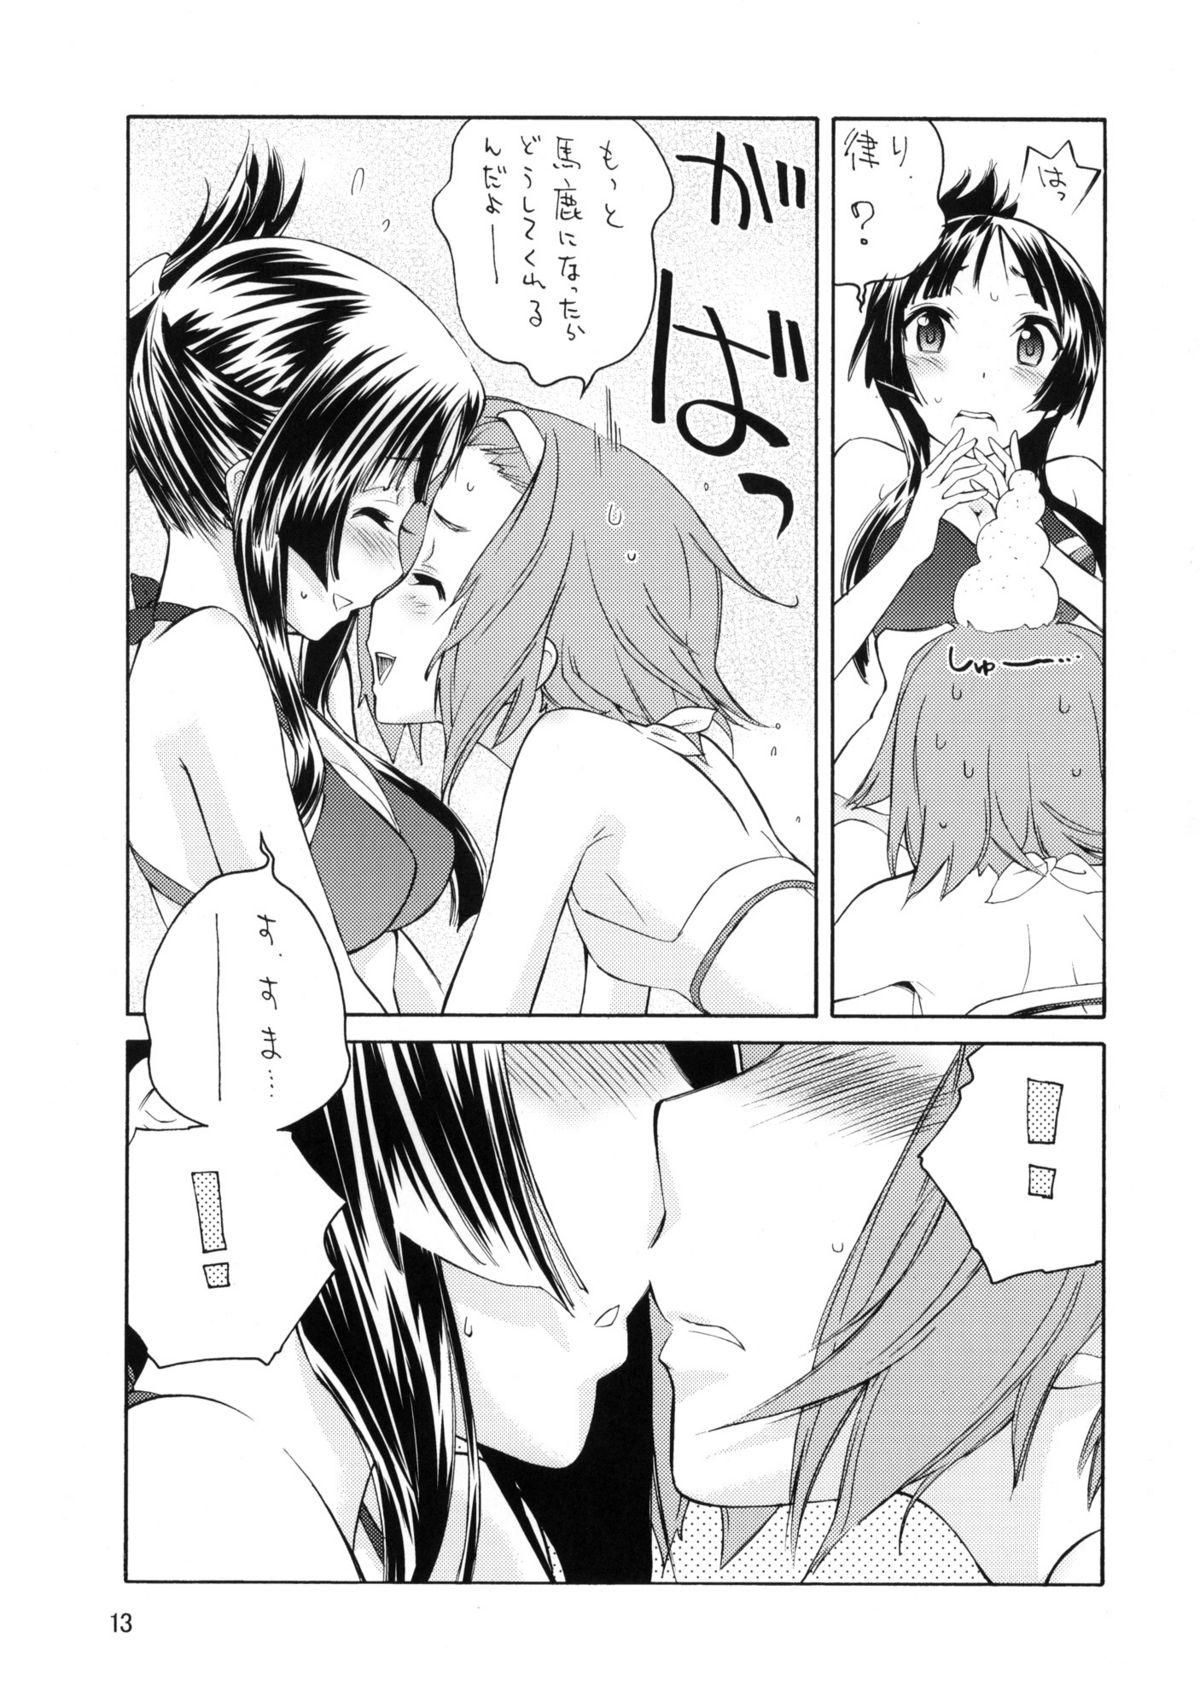 Nasty BUTTERFLIES - K-on Oral Sex Porn - Page 12